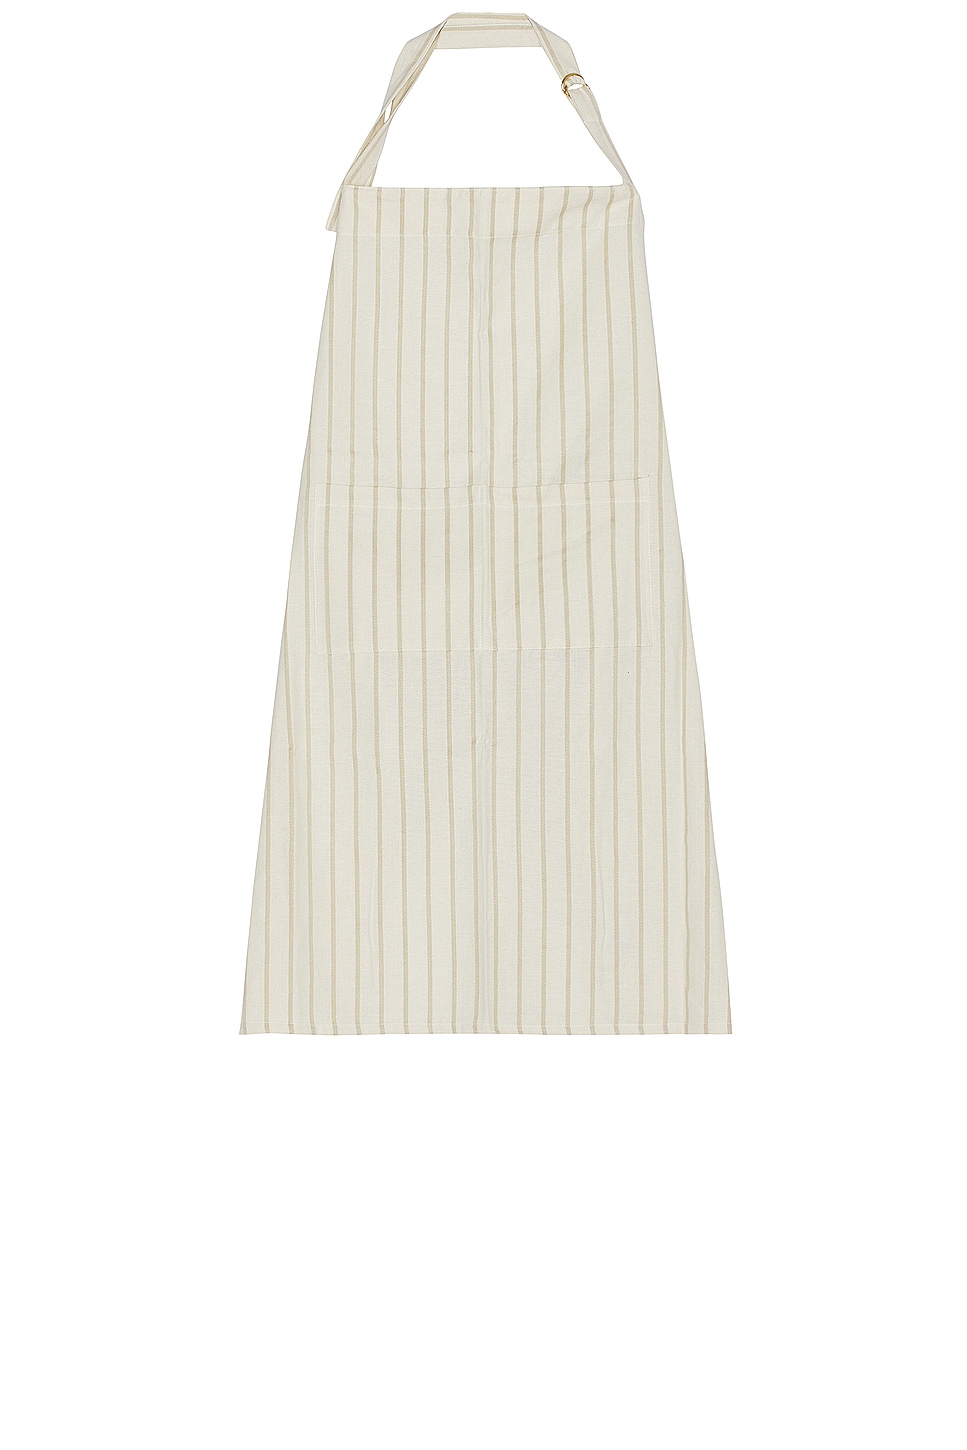 Image 1 of HAWKINS NEW YORK Essential Striped Apron in Flax & Ivory